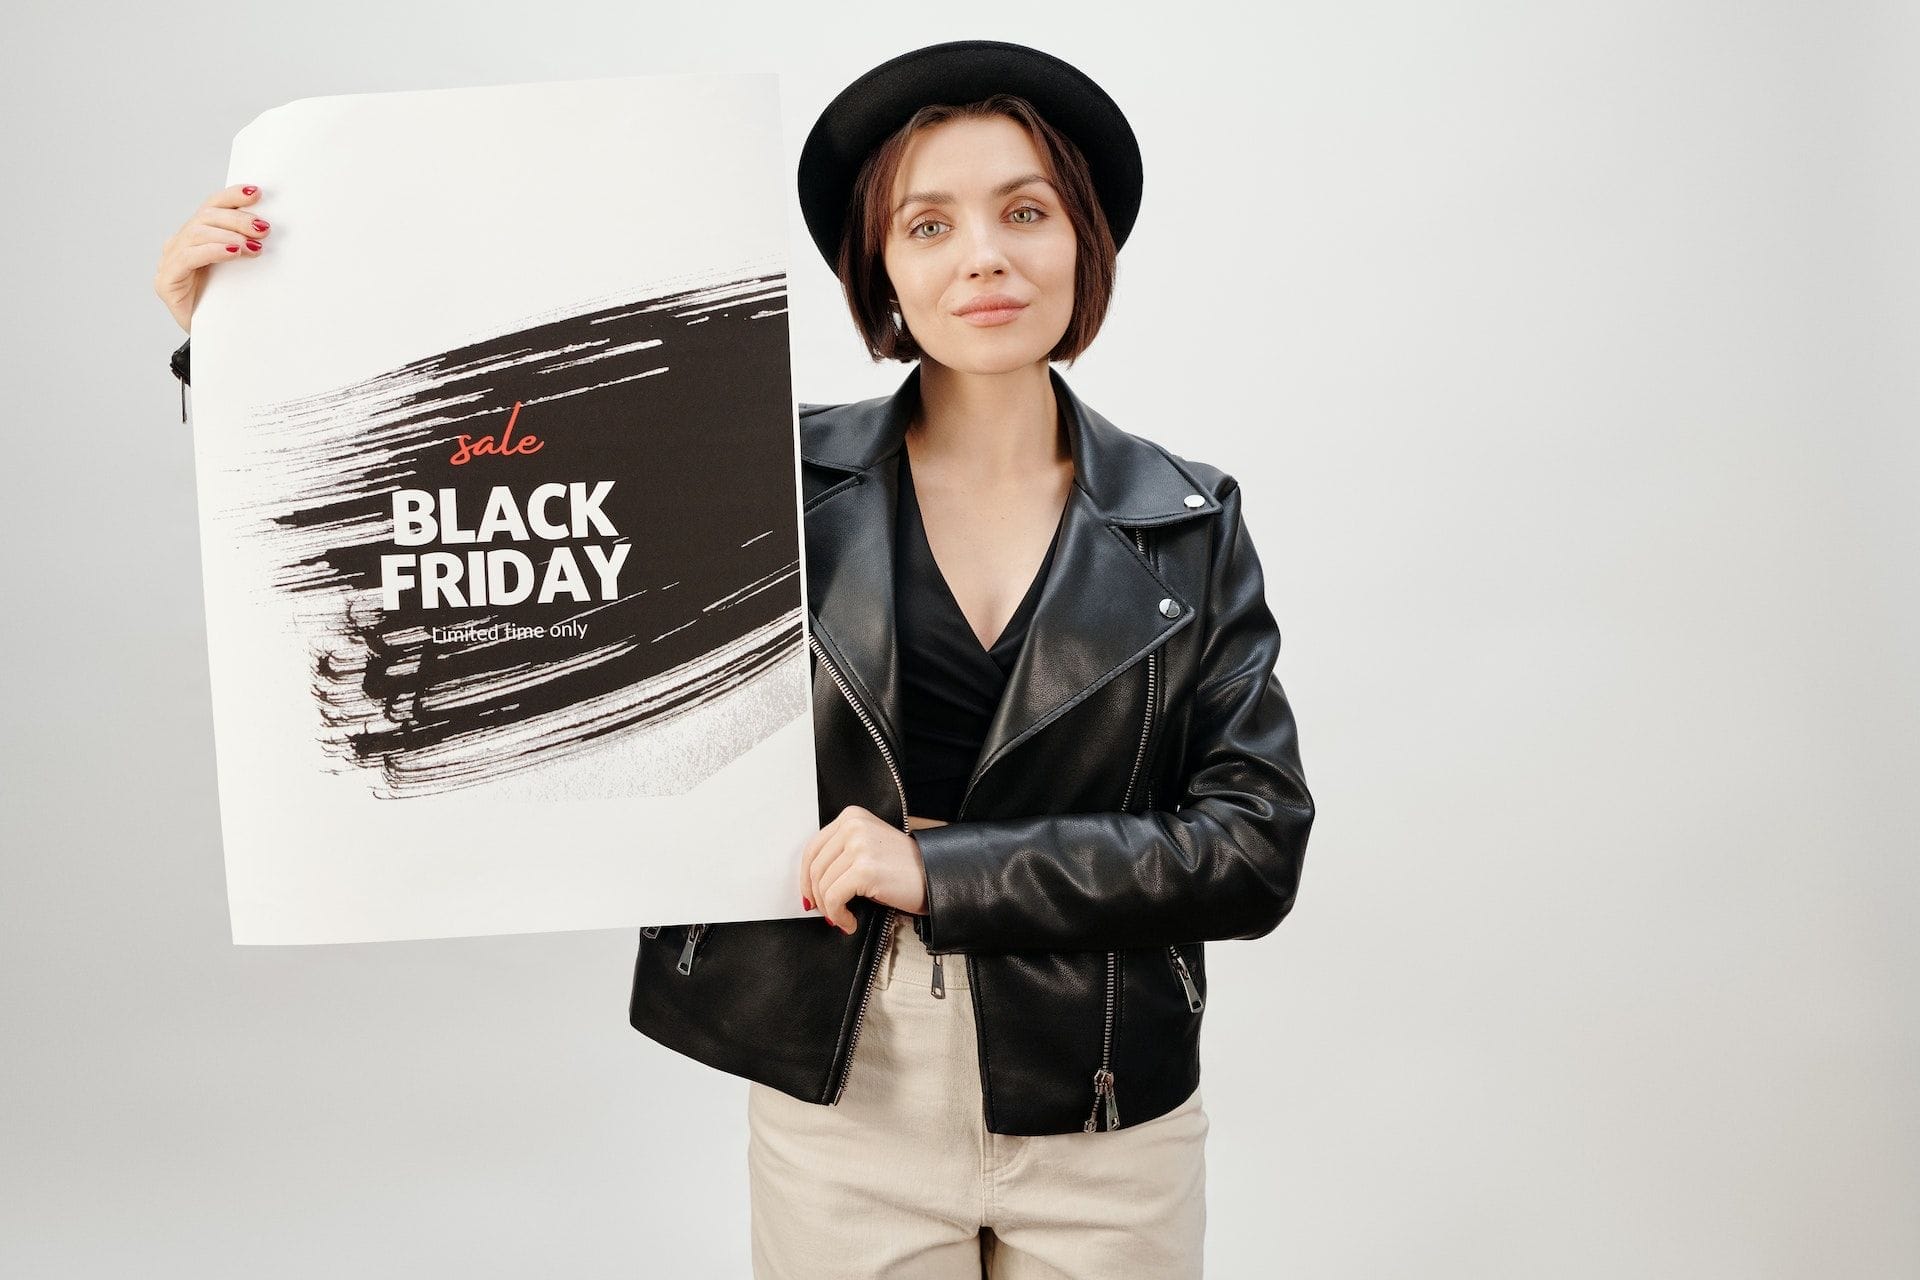 Black Friday: the end of an era?